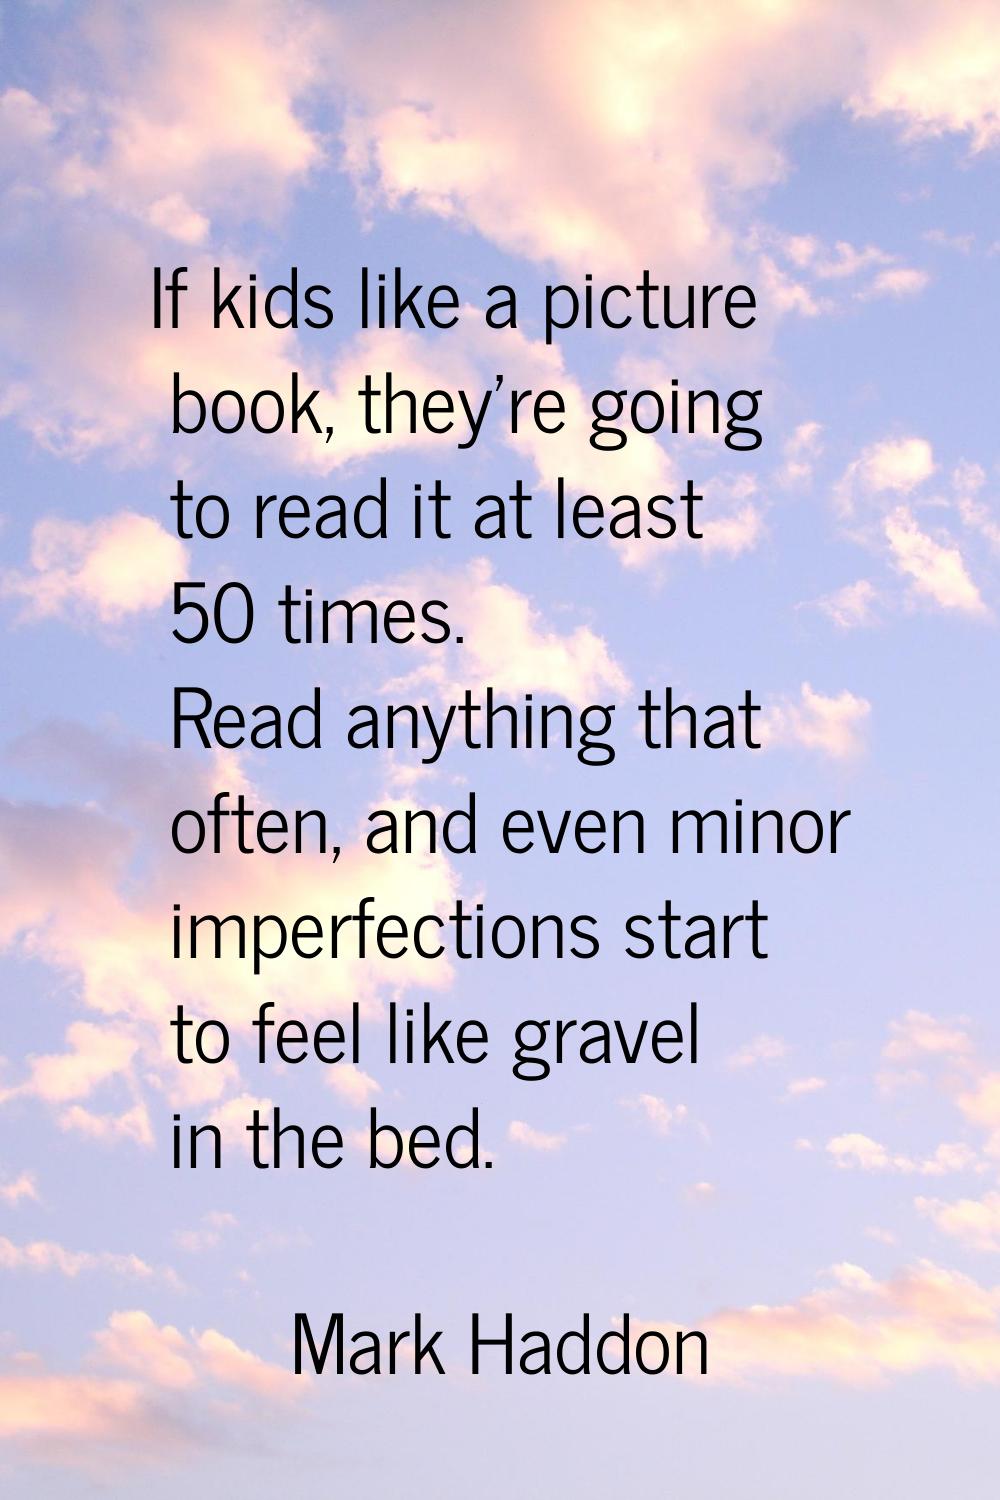 If kids like a picture book, they're going to read it at least 50 times. Read anything that often, 